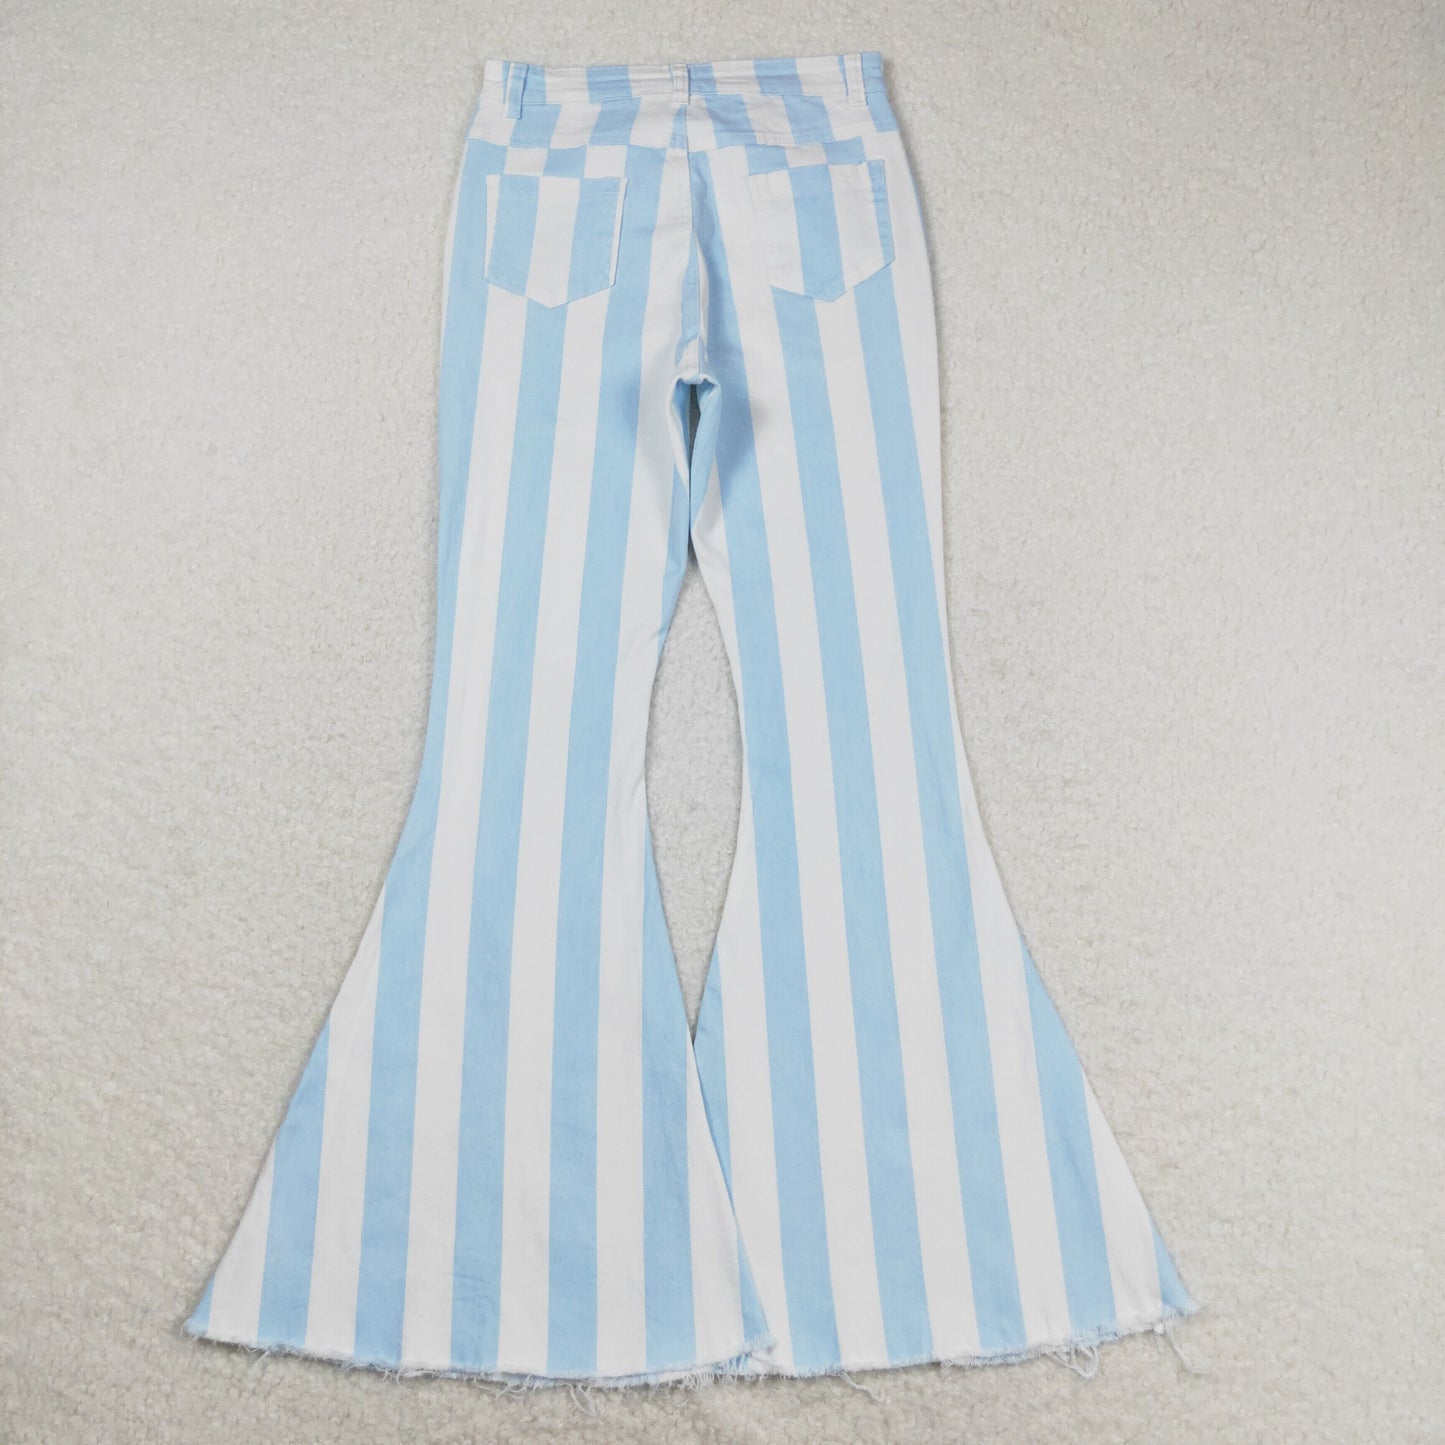 P0458 Adult women blue and white striped denim trousers